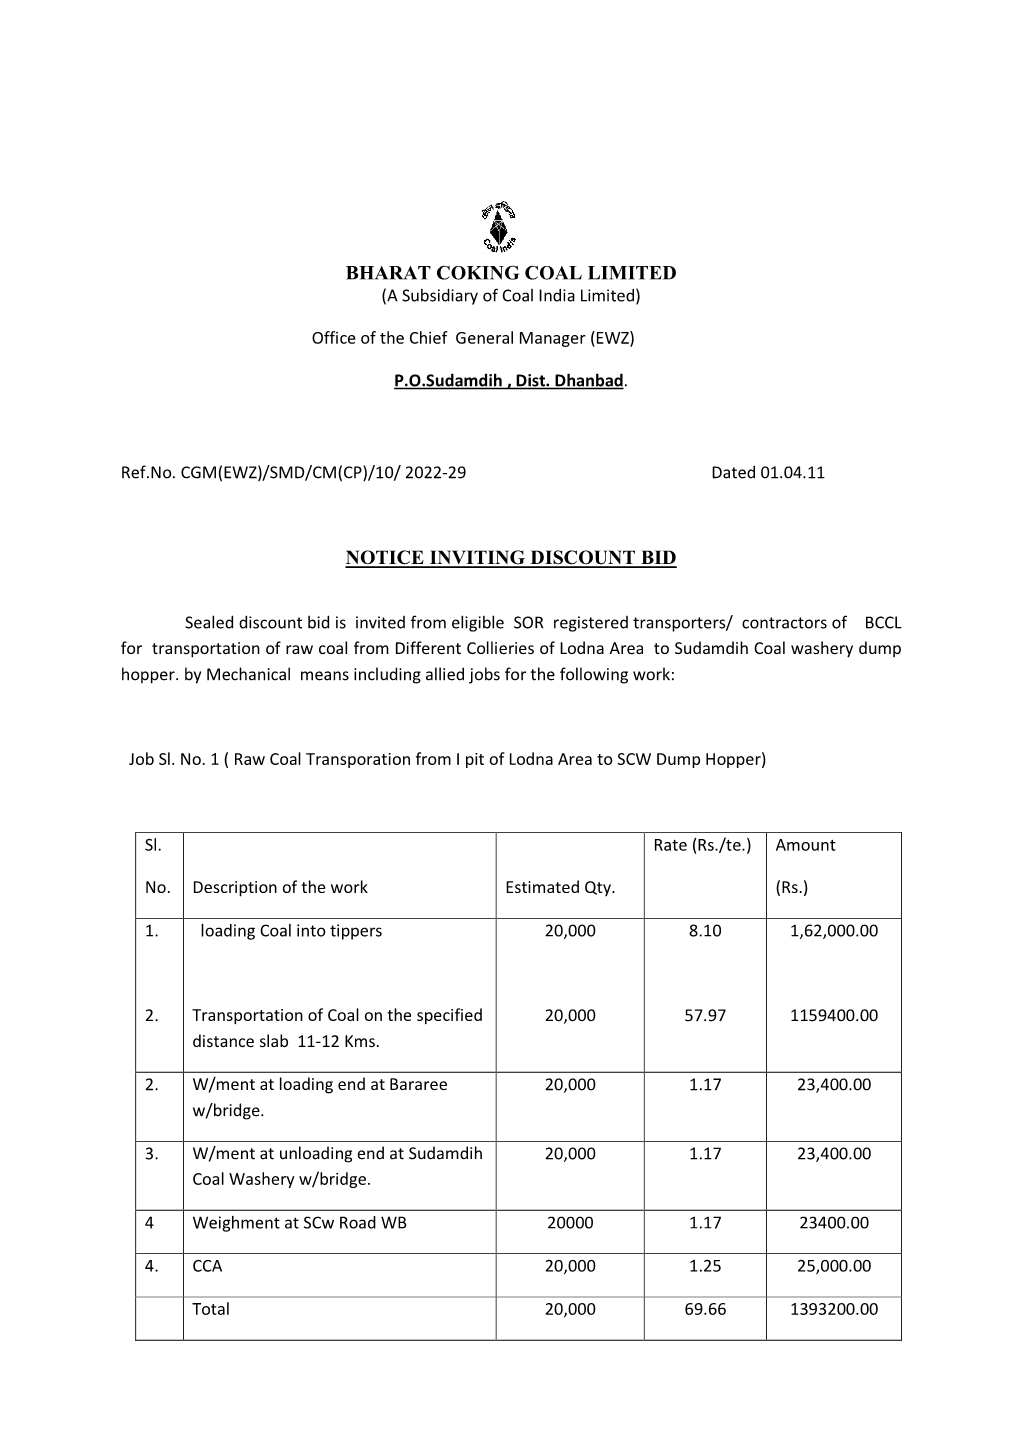 Bharat Coking Coal Limited Notice Inviting Discount